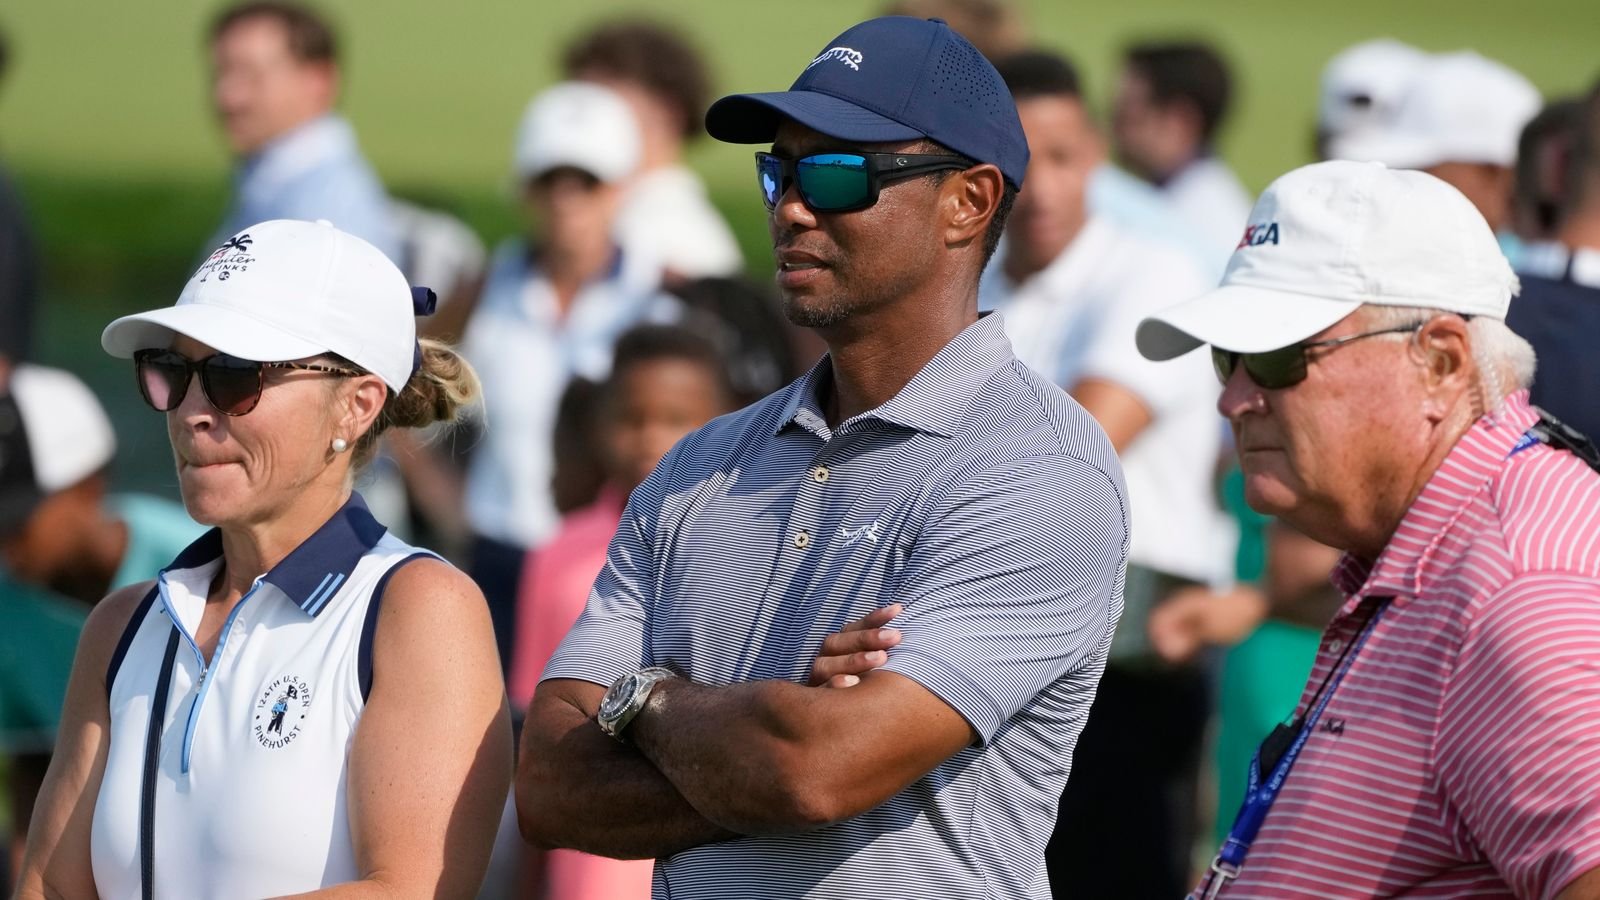 Tiger Woods watches as son Charlie exits US Junior Amateur championship | Golf News